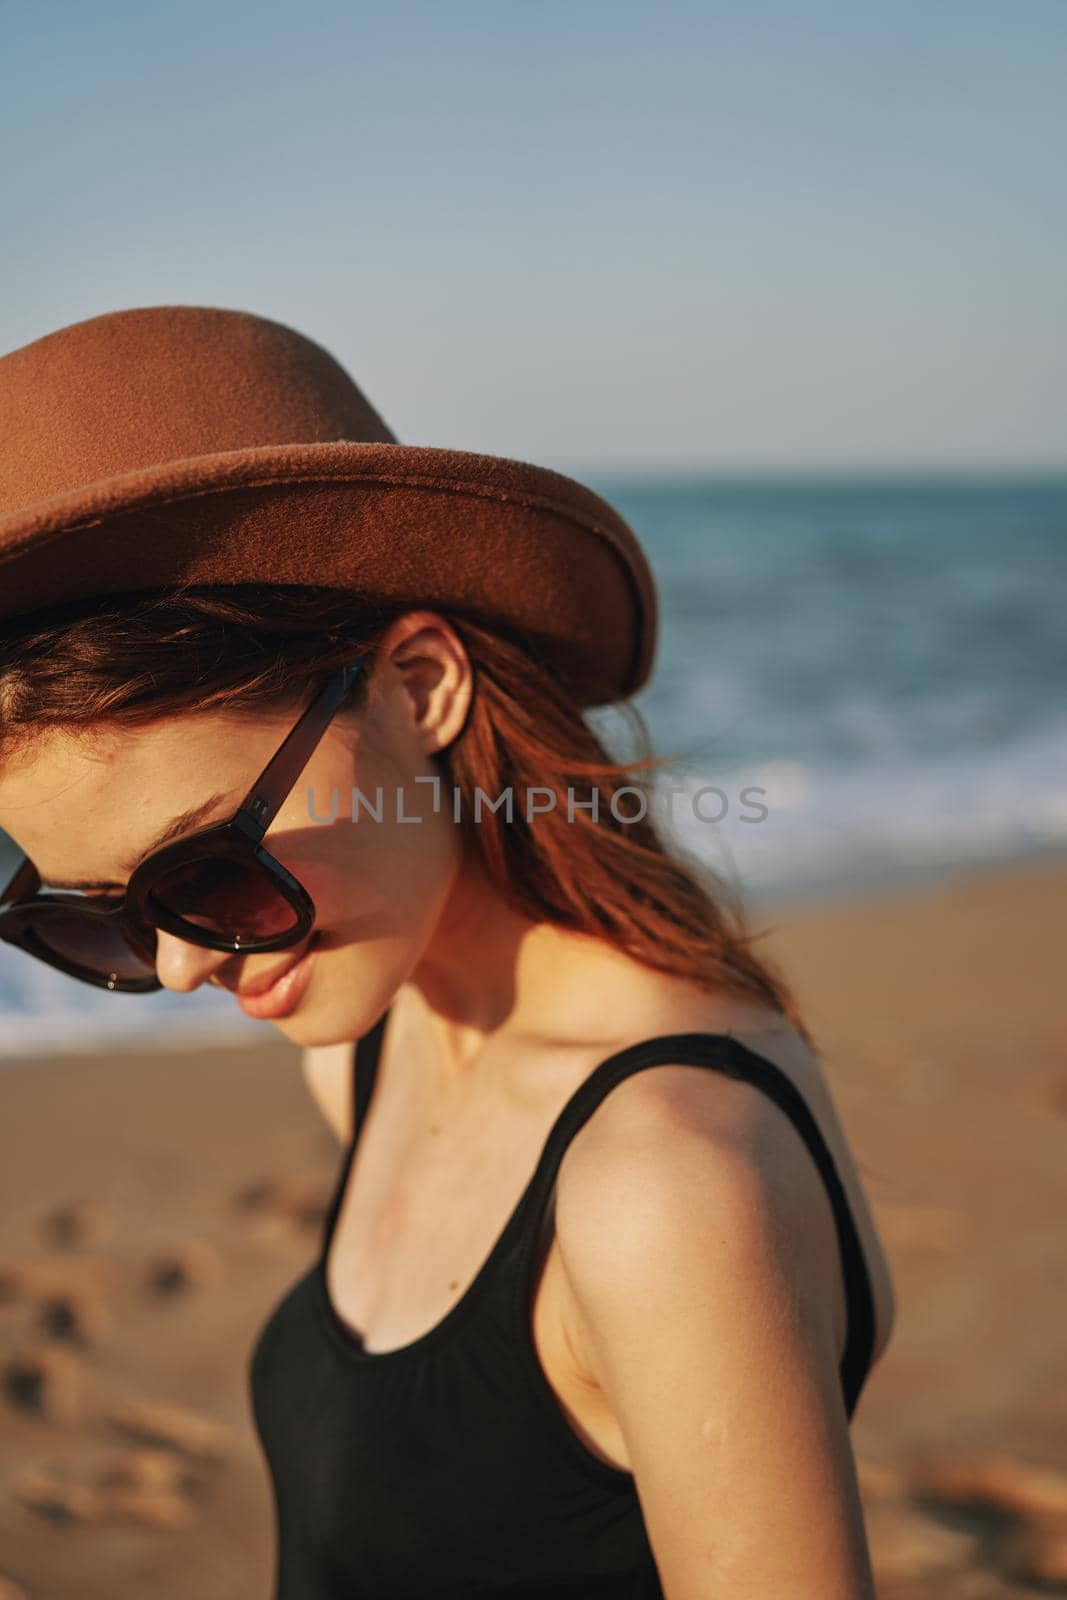 pretty woman in hat and sunglasses on the beach walk sun. High quality photo